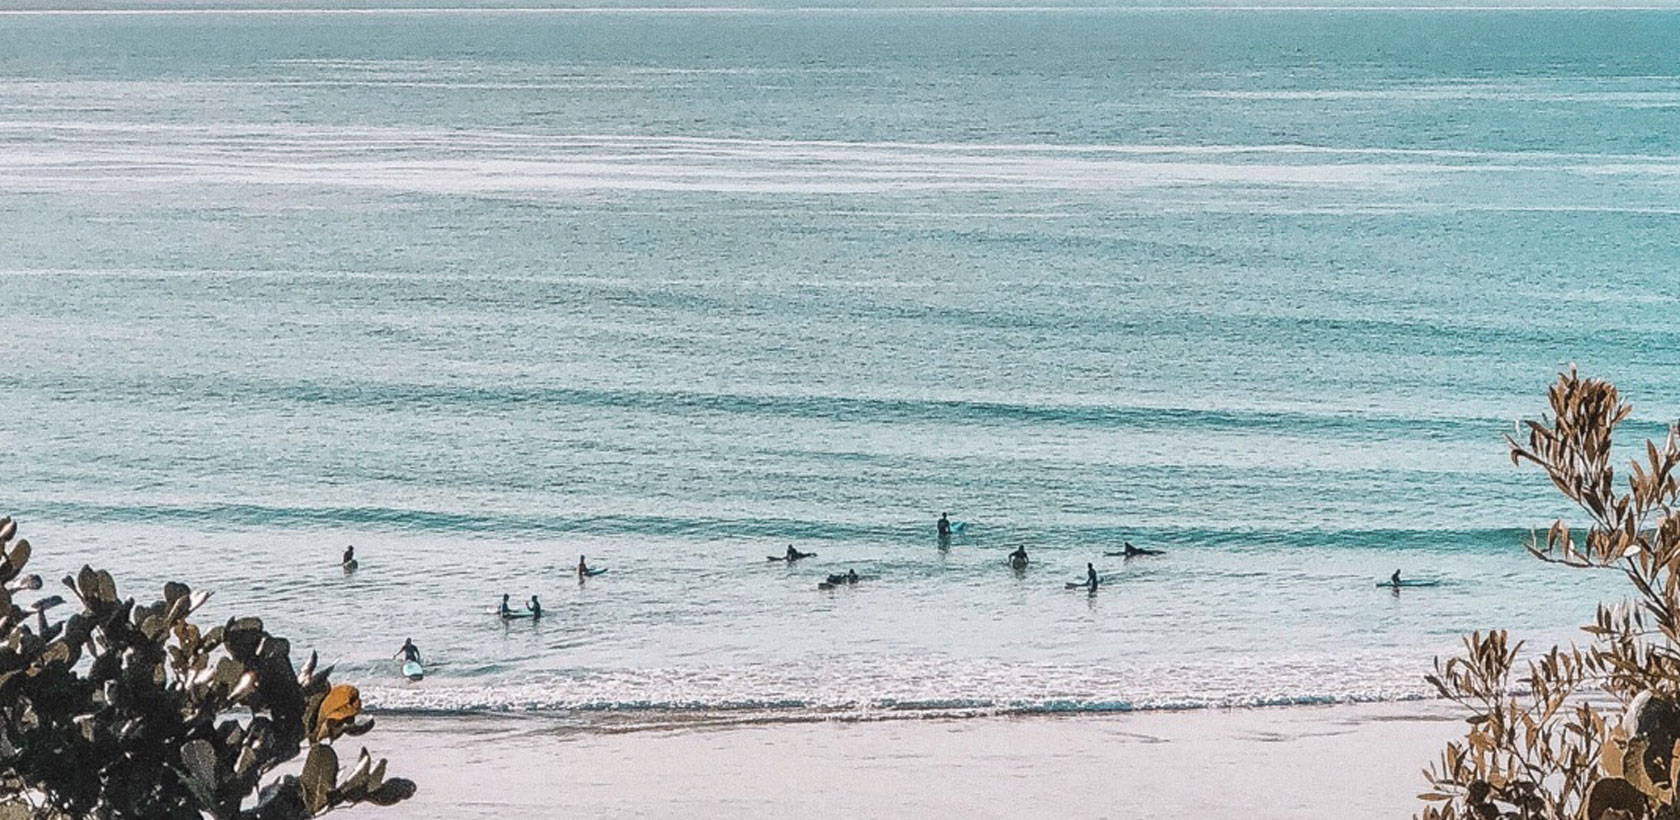 Spell People + Planet image of Byron Bay beach